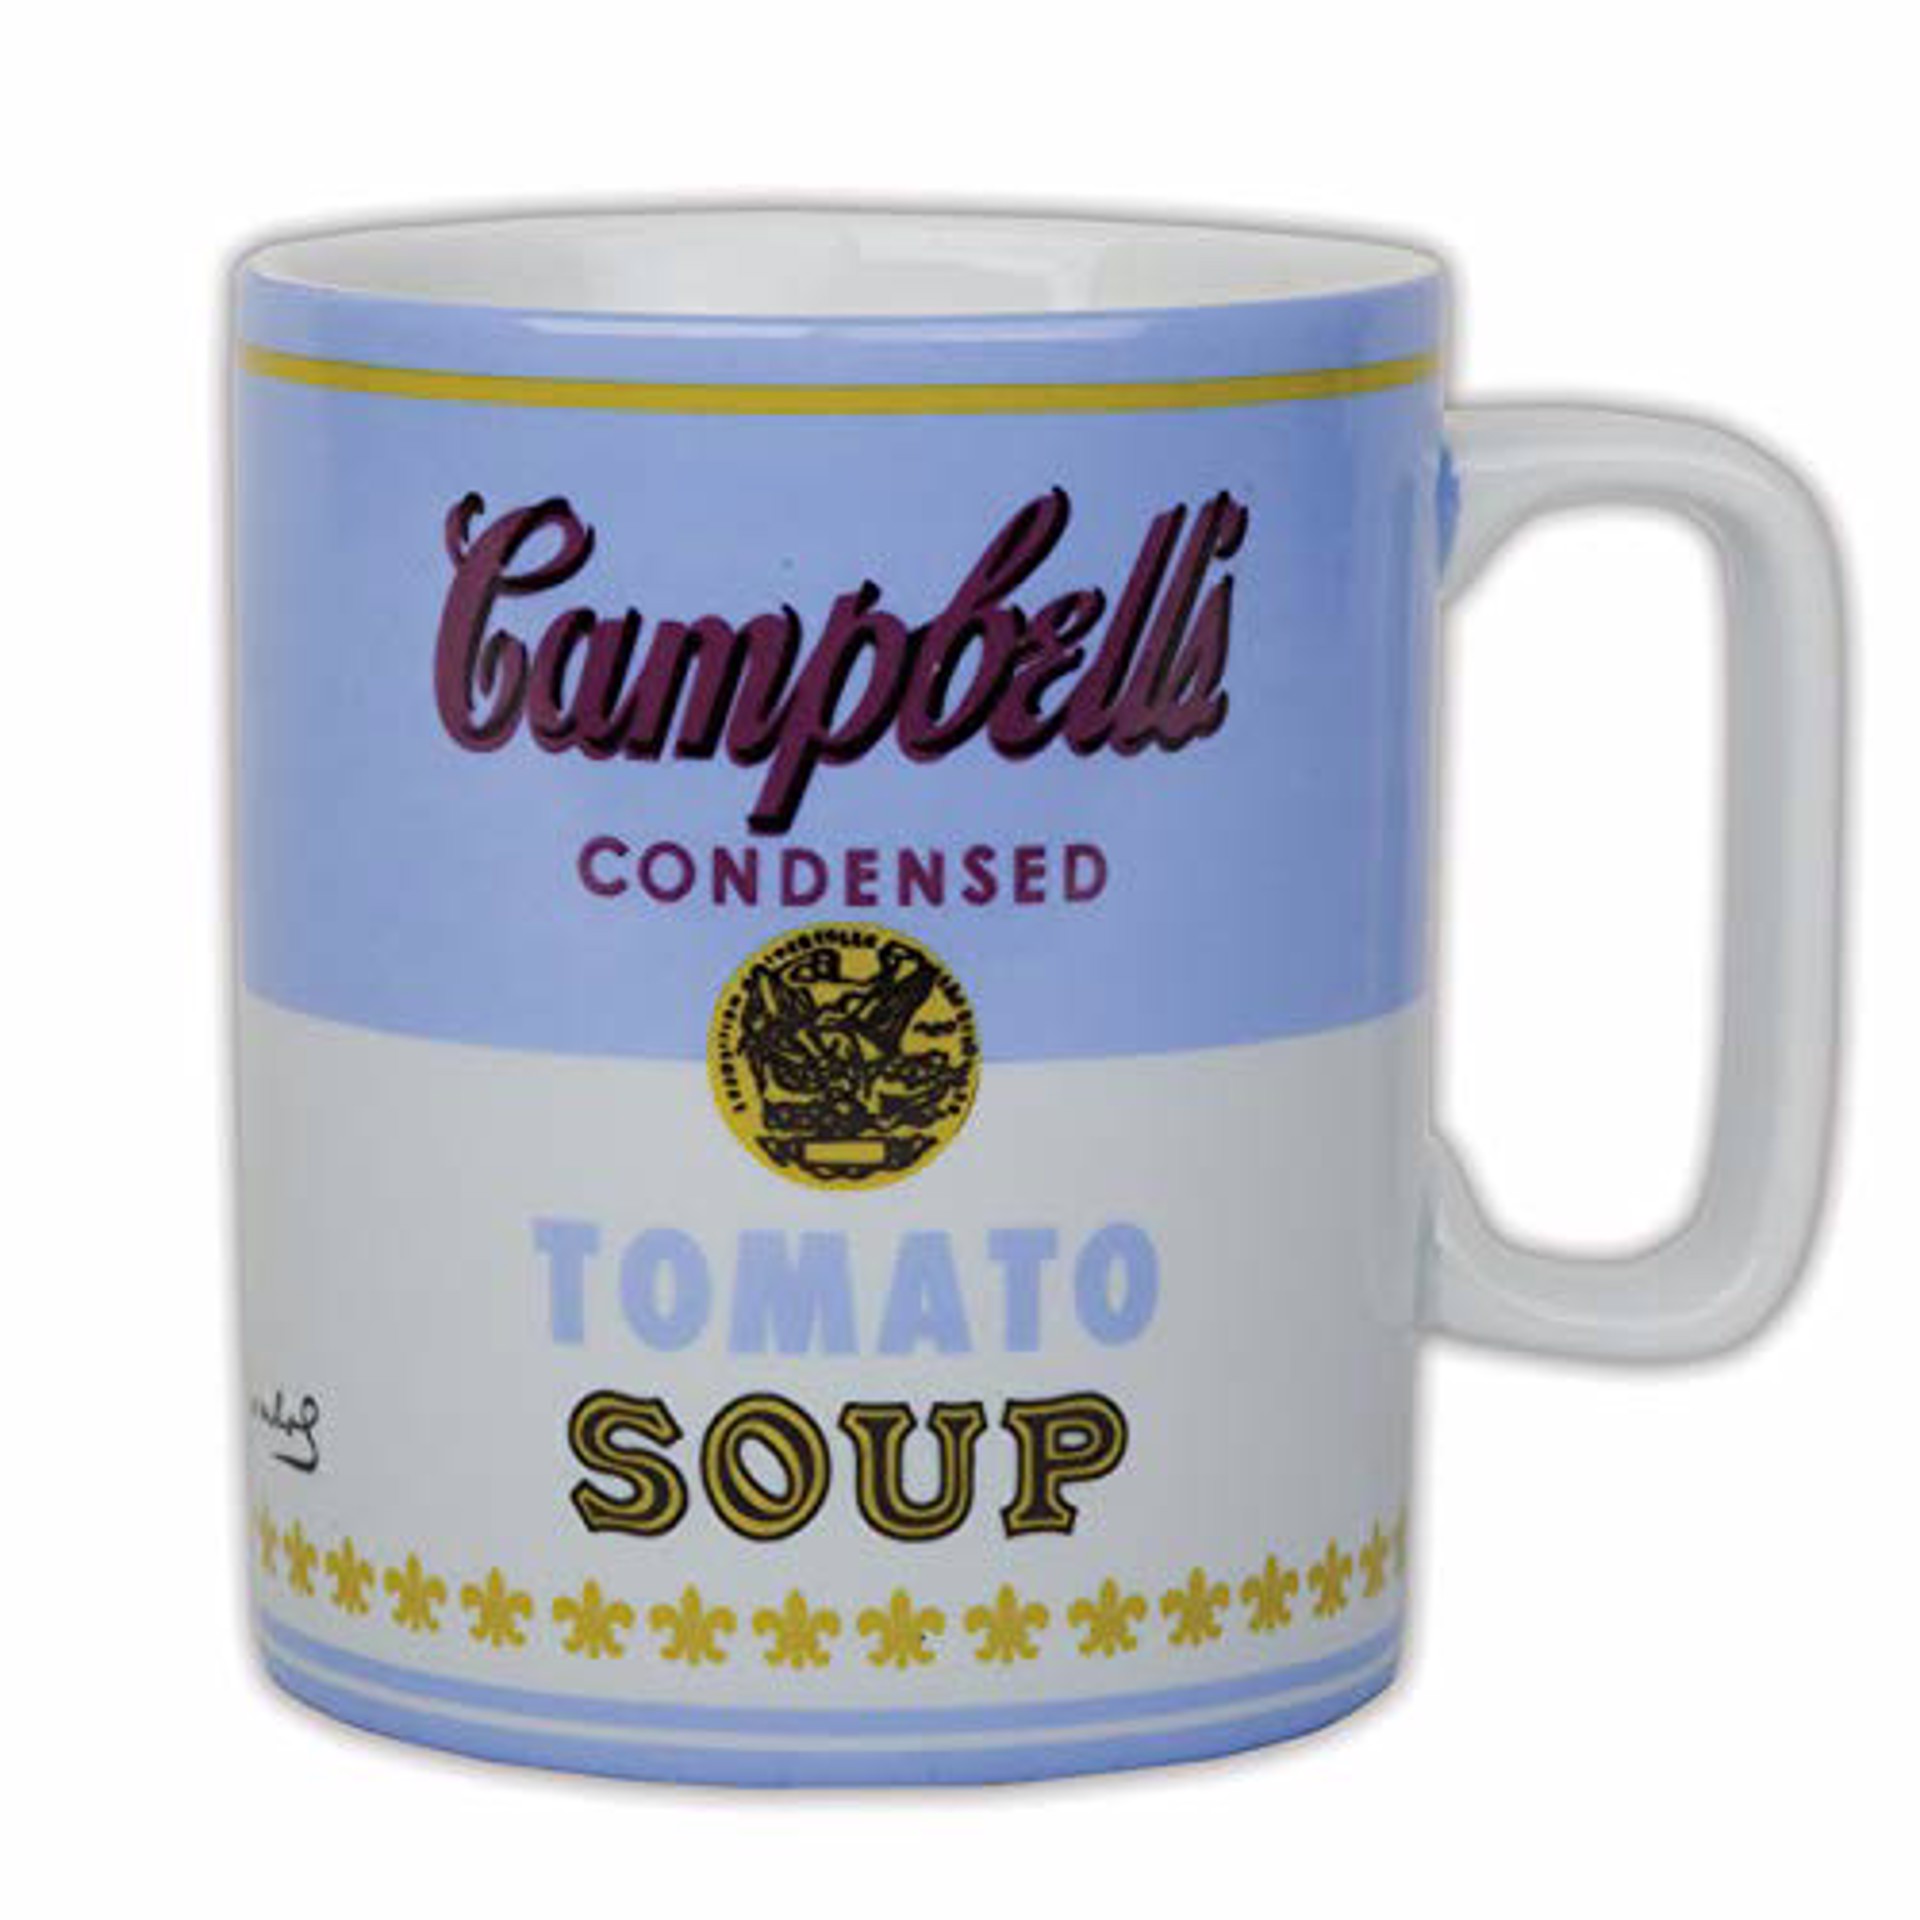 Campbell’s Soup Violet Mug by Andy Warhol